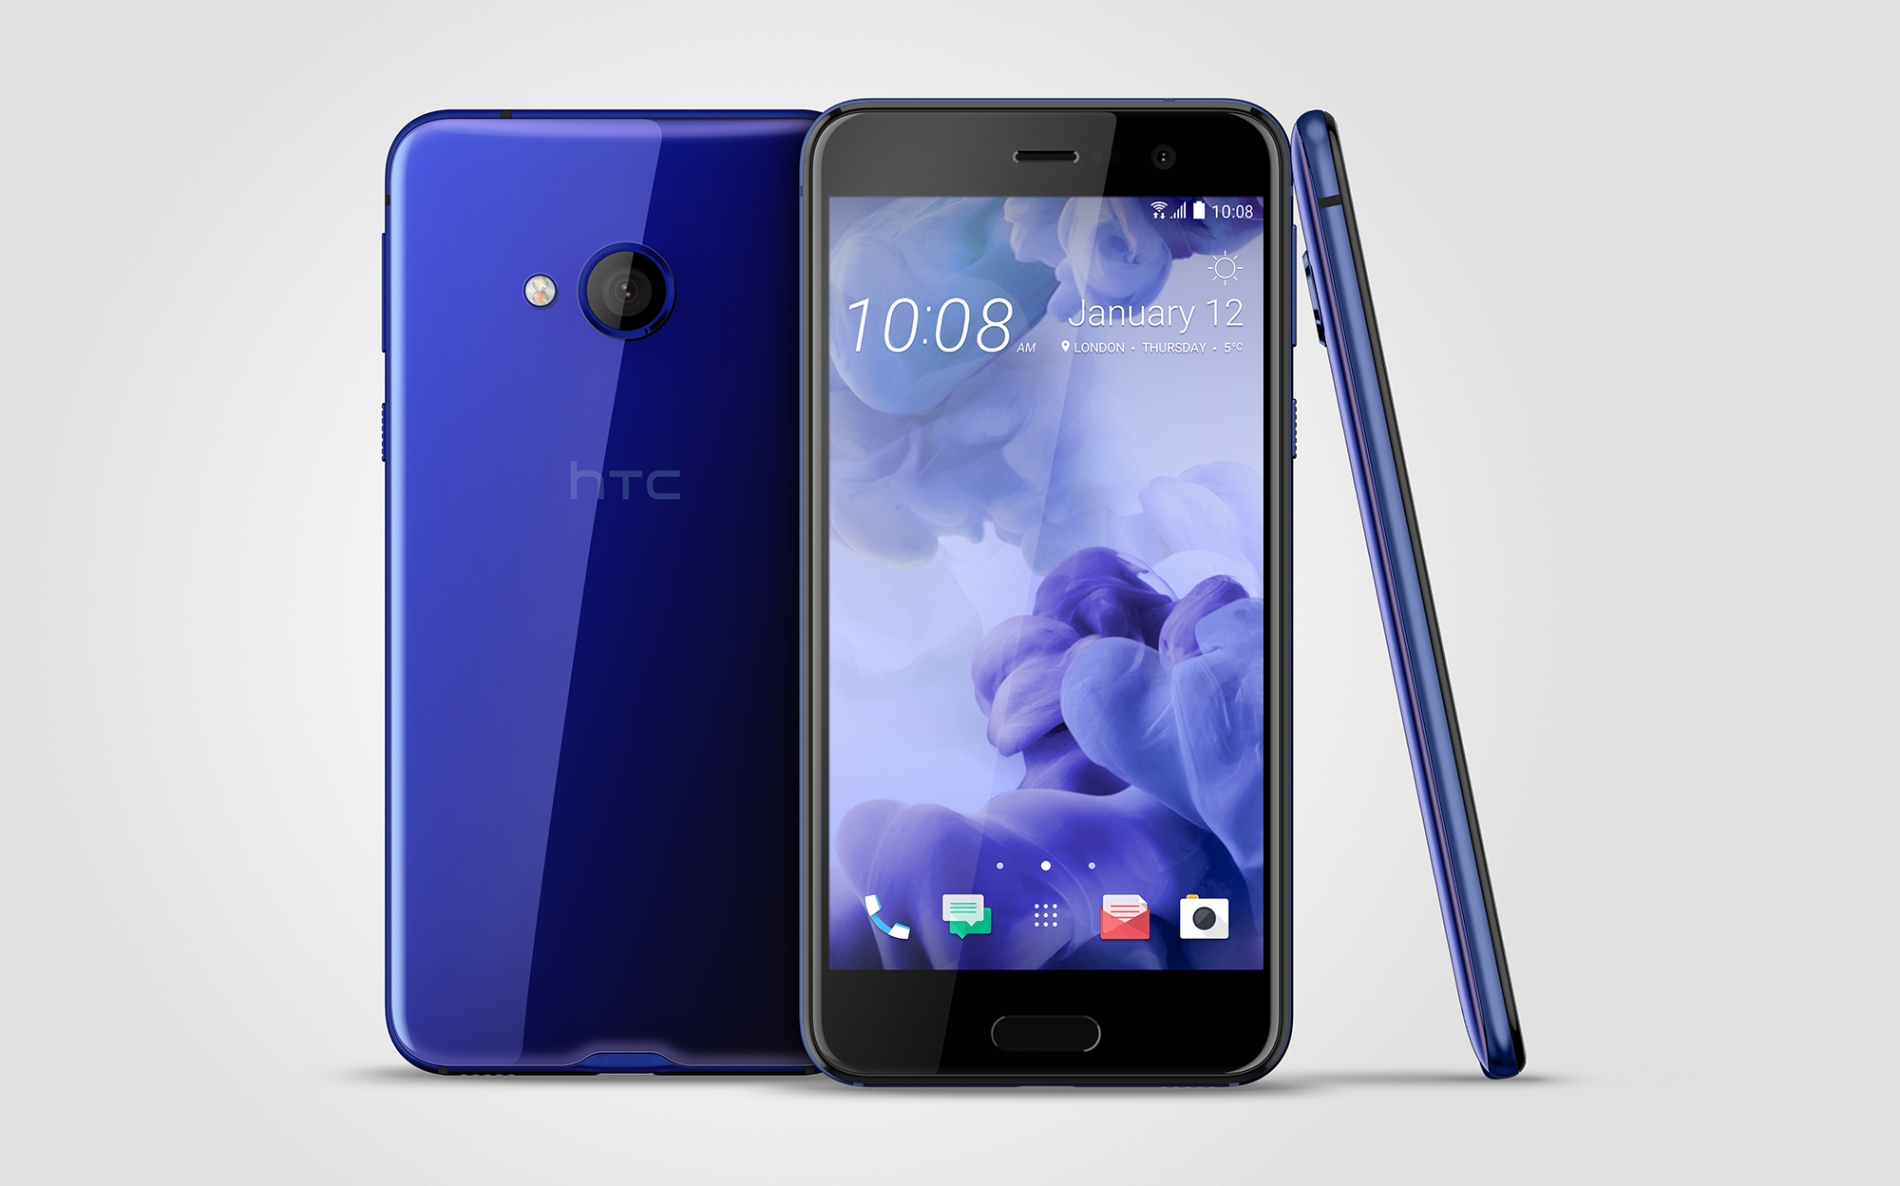 Price Drop Alert: HTC U Play now available for Rs 29,990 (original price: Rs 39,990)